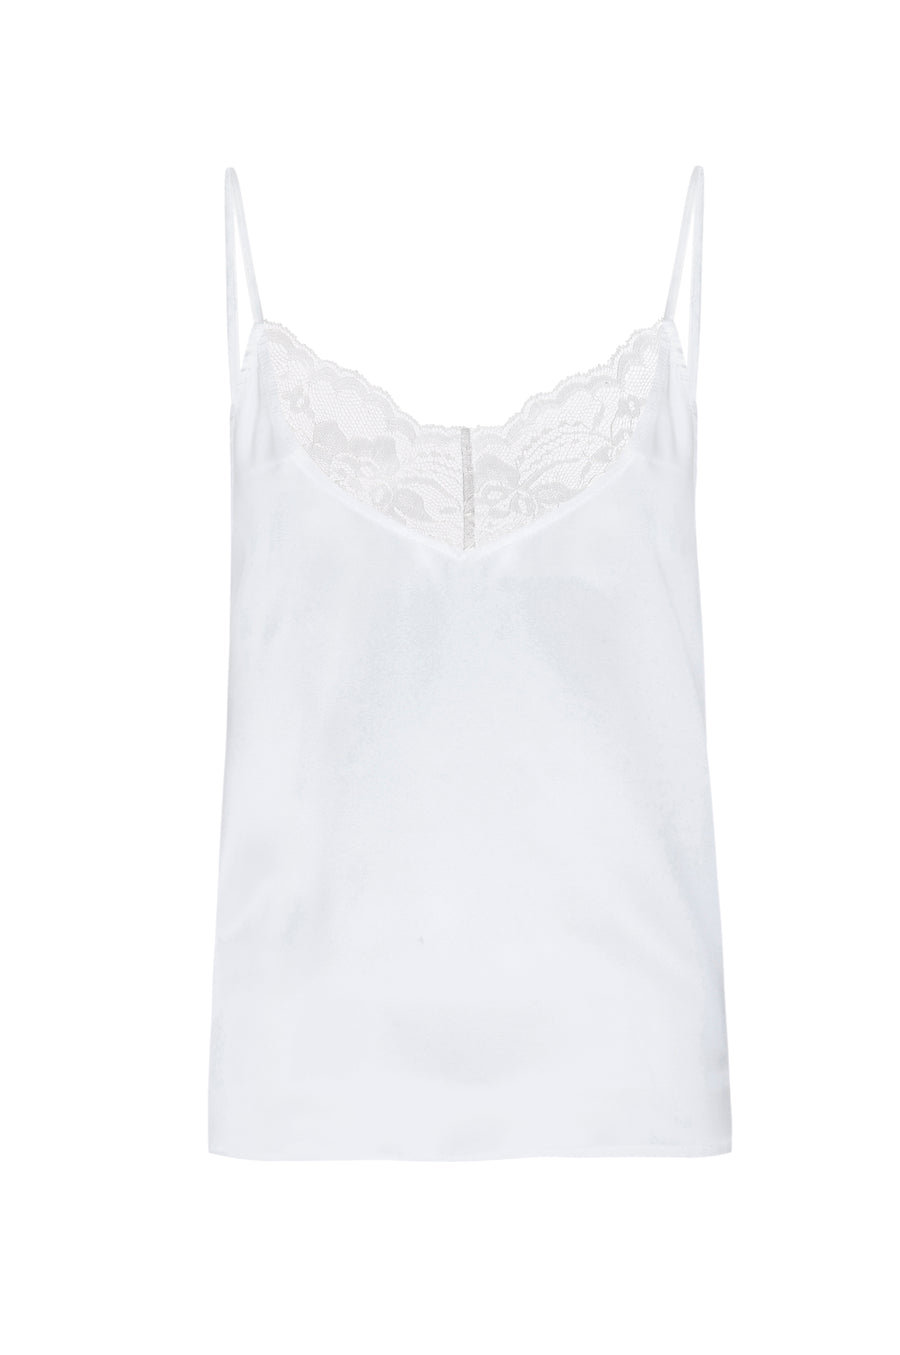 Silk Charmeuse 'August' Tank with Lace: Ivory